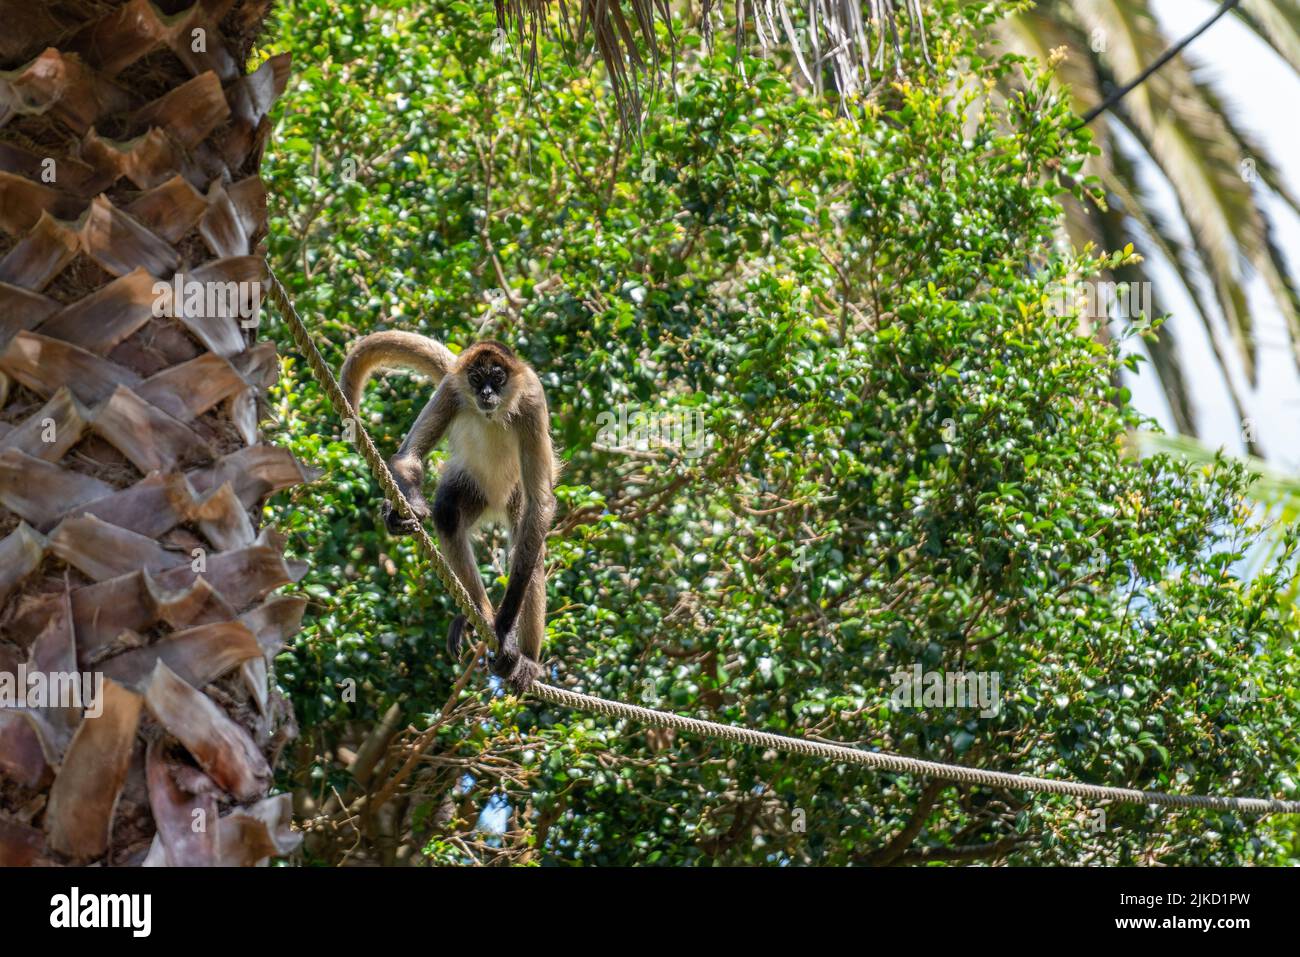 The close-up view of a Yucatan spider monkey on the rope Stock Photo